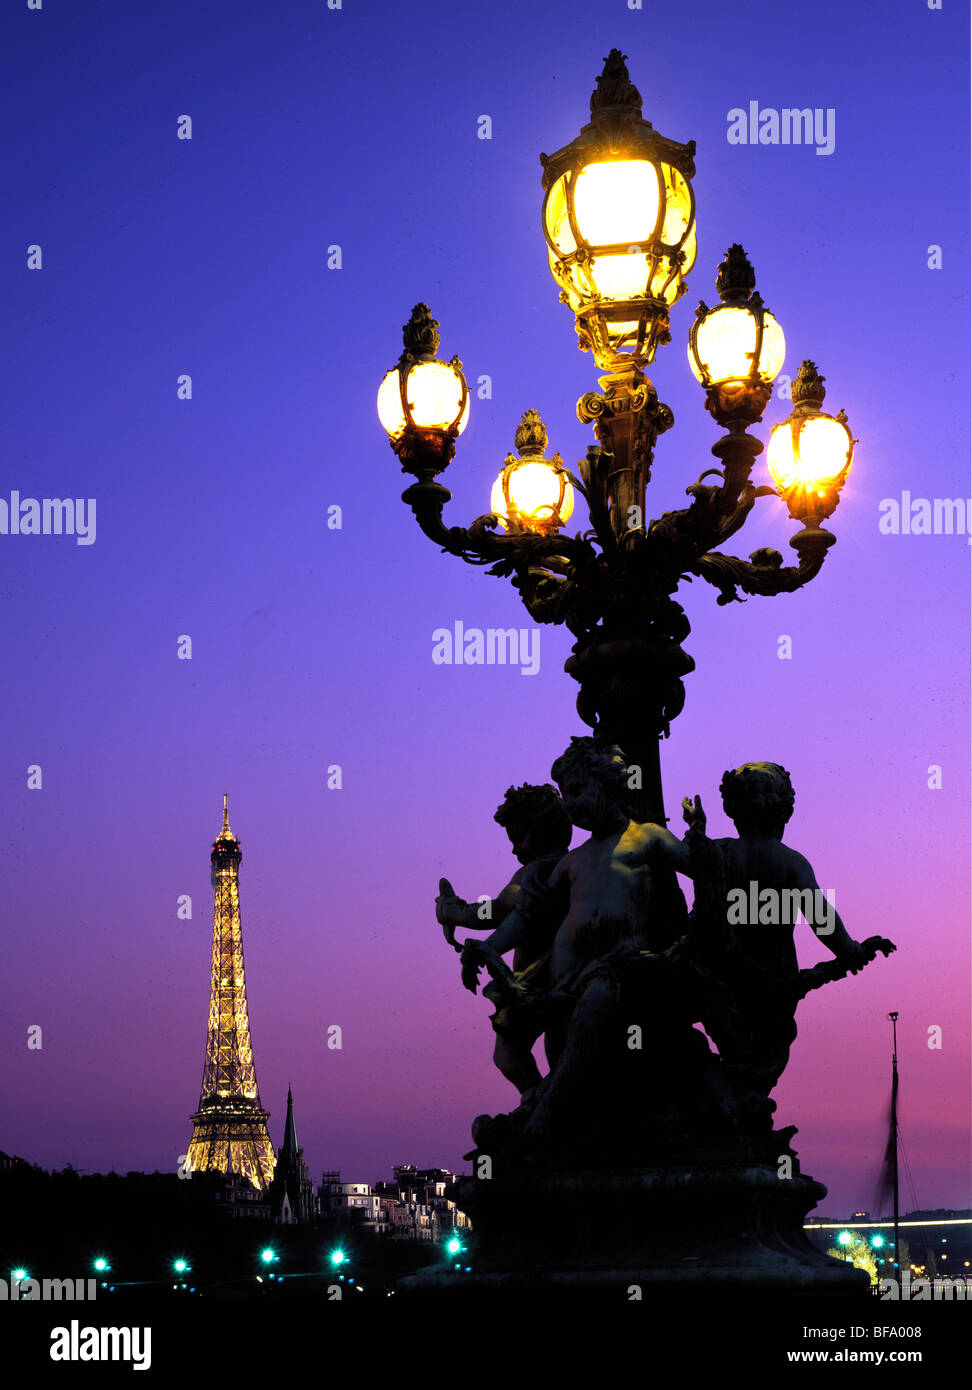 Eiffel Tower at night and ornate street lamp on Pont Alexandre 111 ...